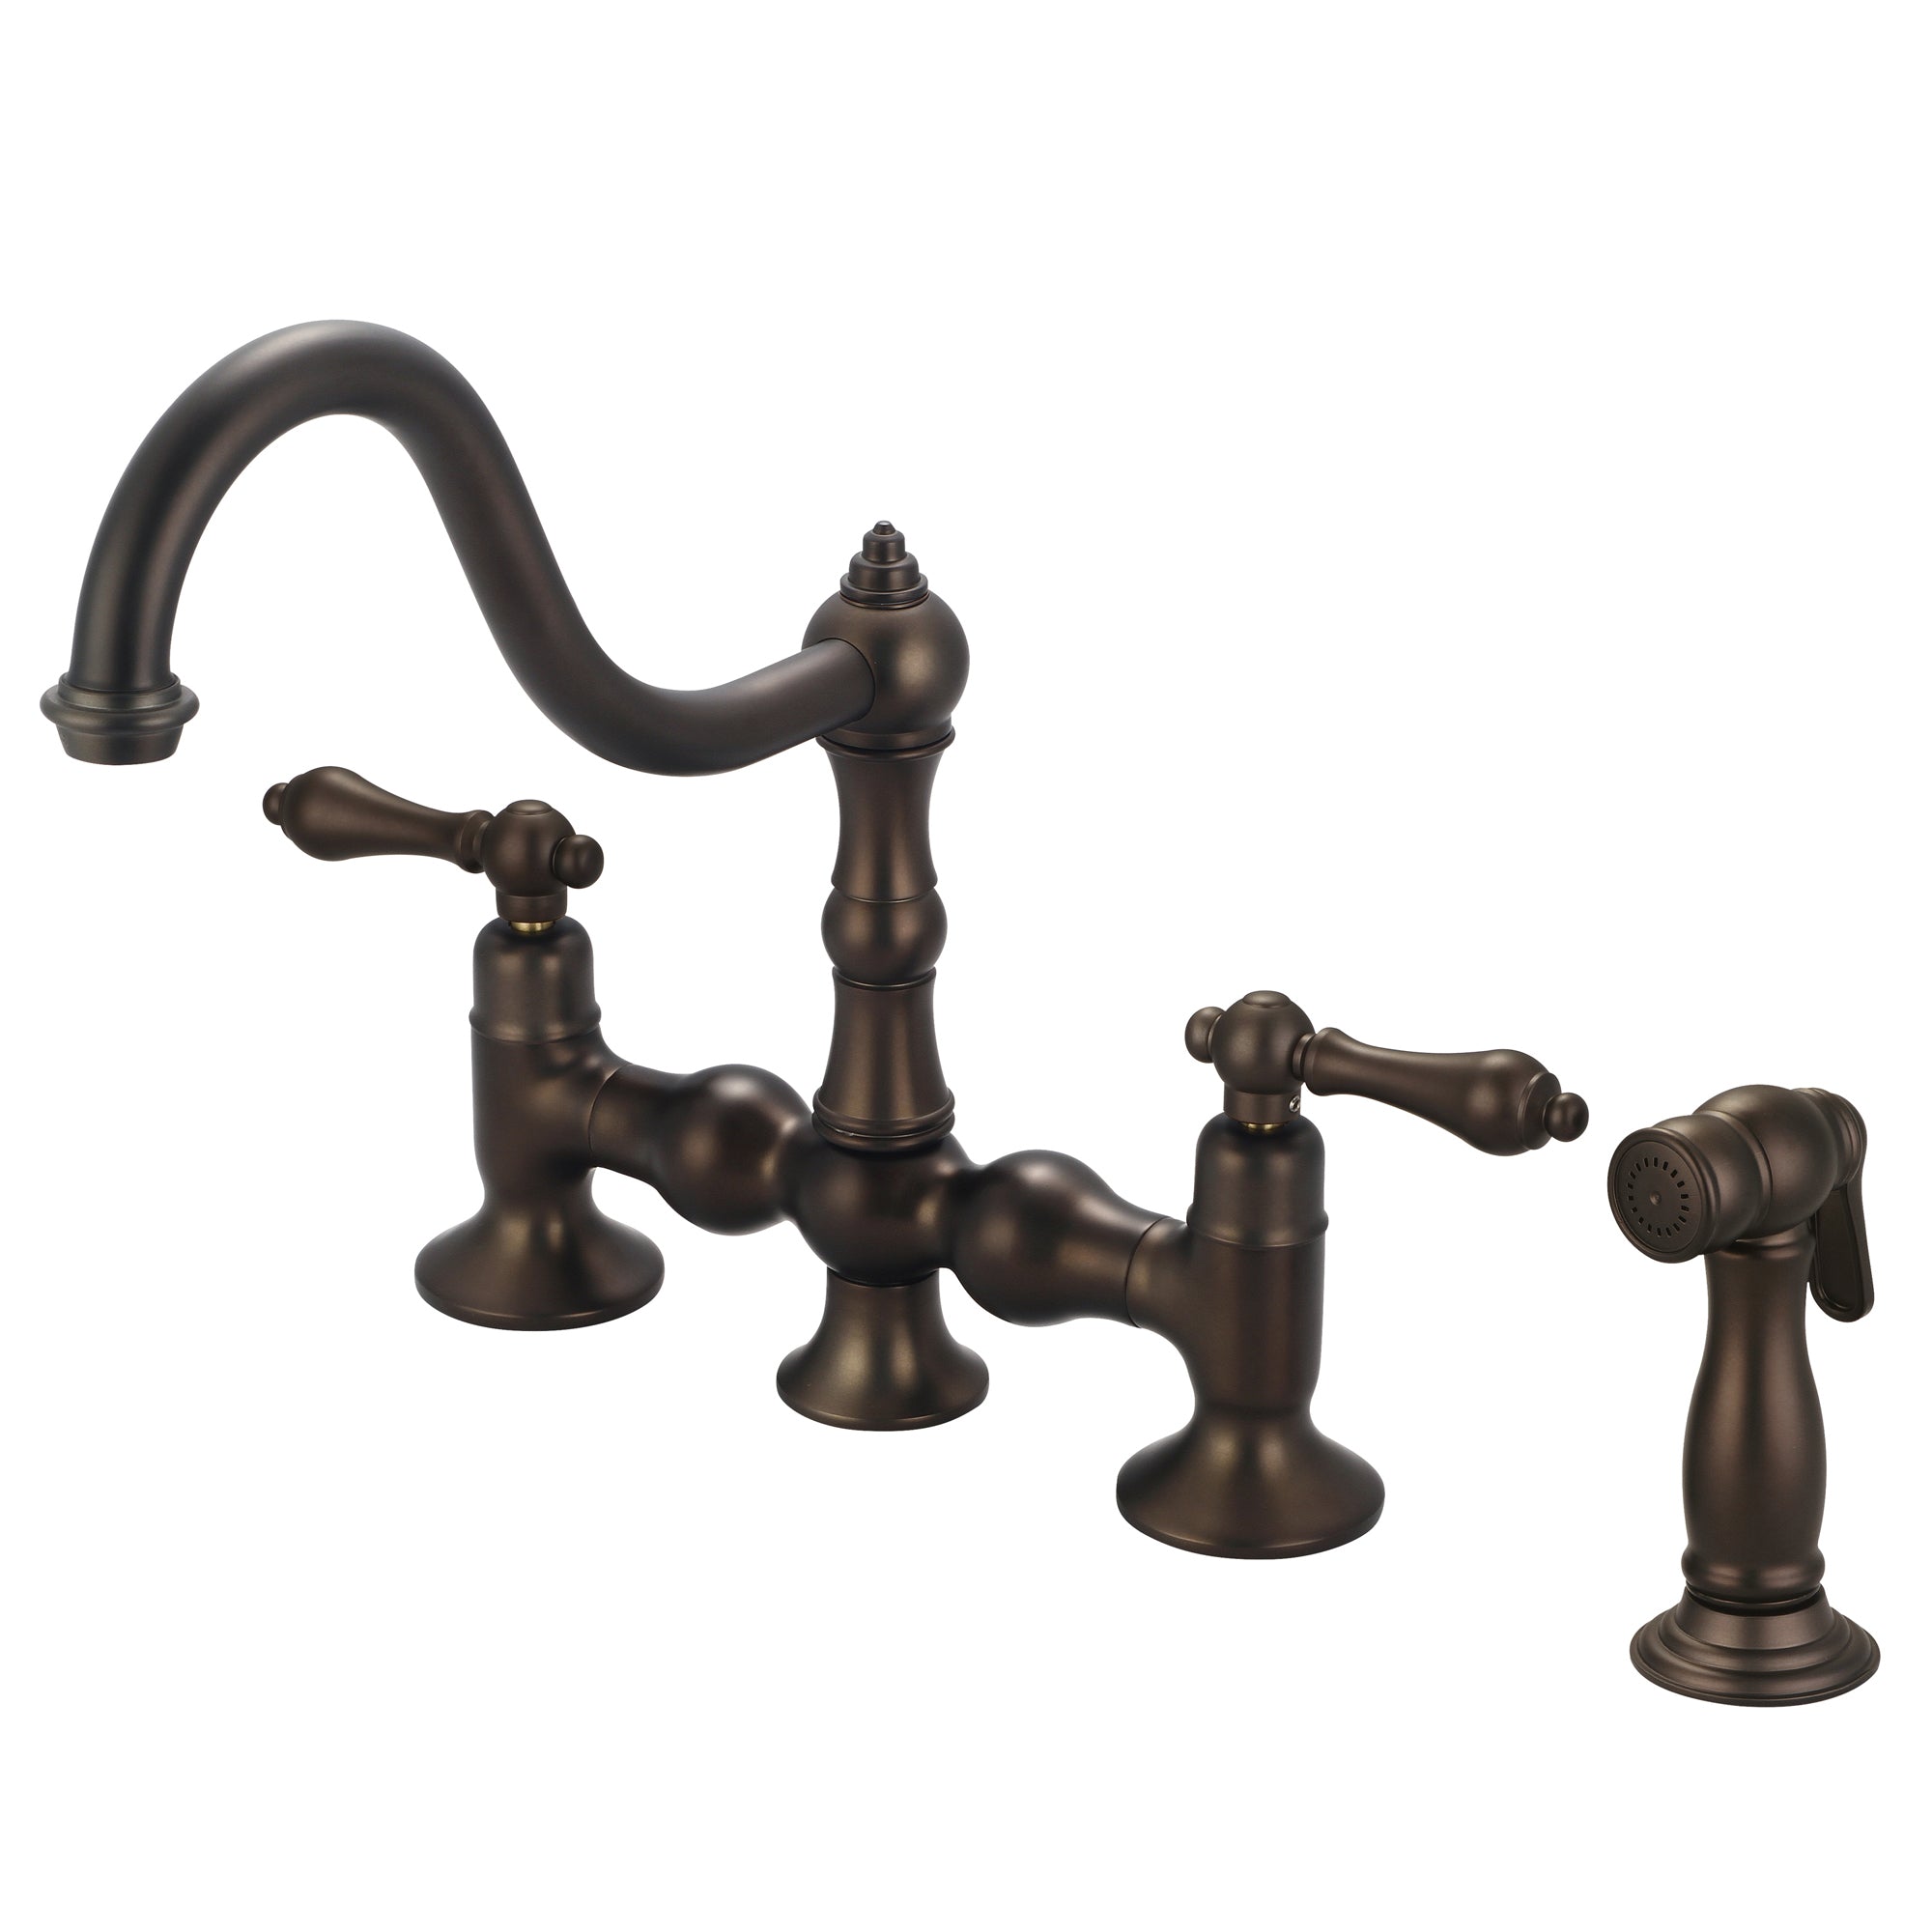 Water Creation | Bridge Style Kitchen Faucet With Side Spray To Match in Oil-rubbed Bronze Finish Finish With Metal Lever Handles Without Labels | F5-0010-03-AL